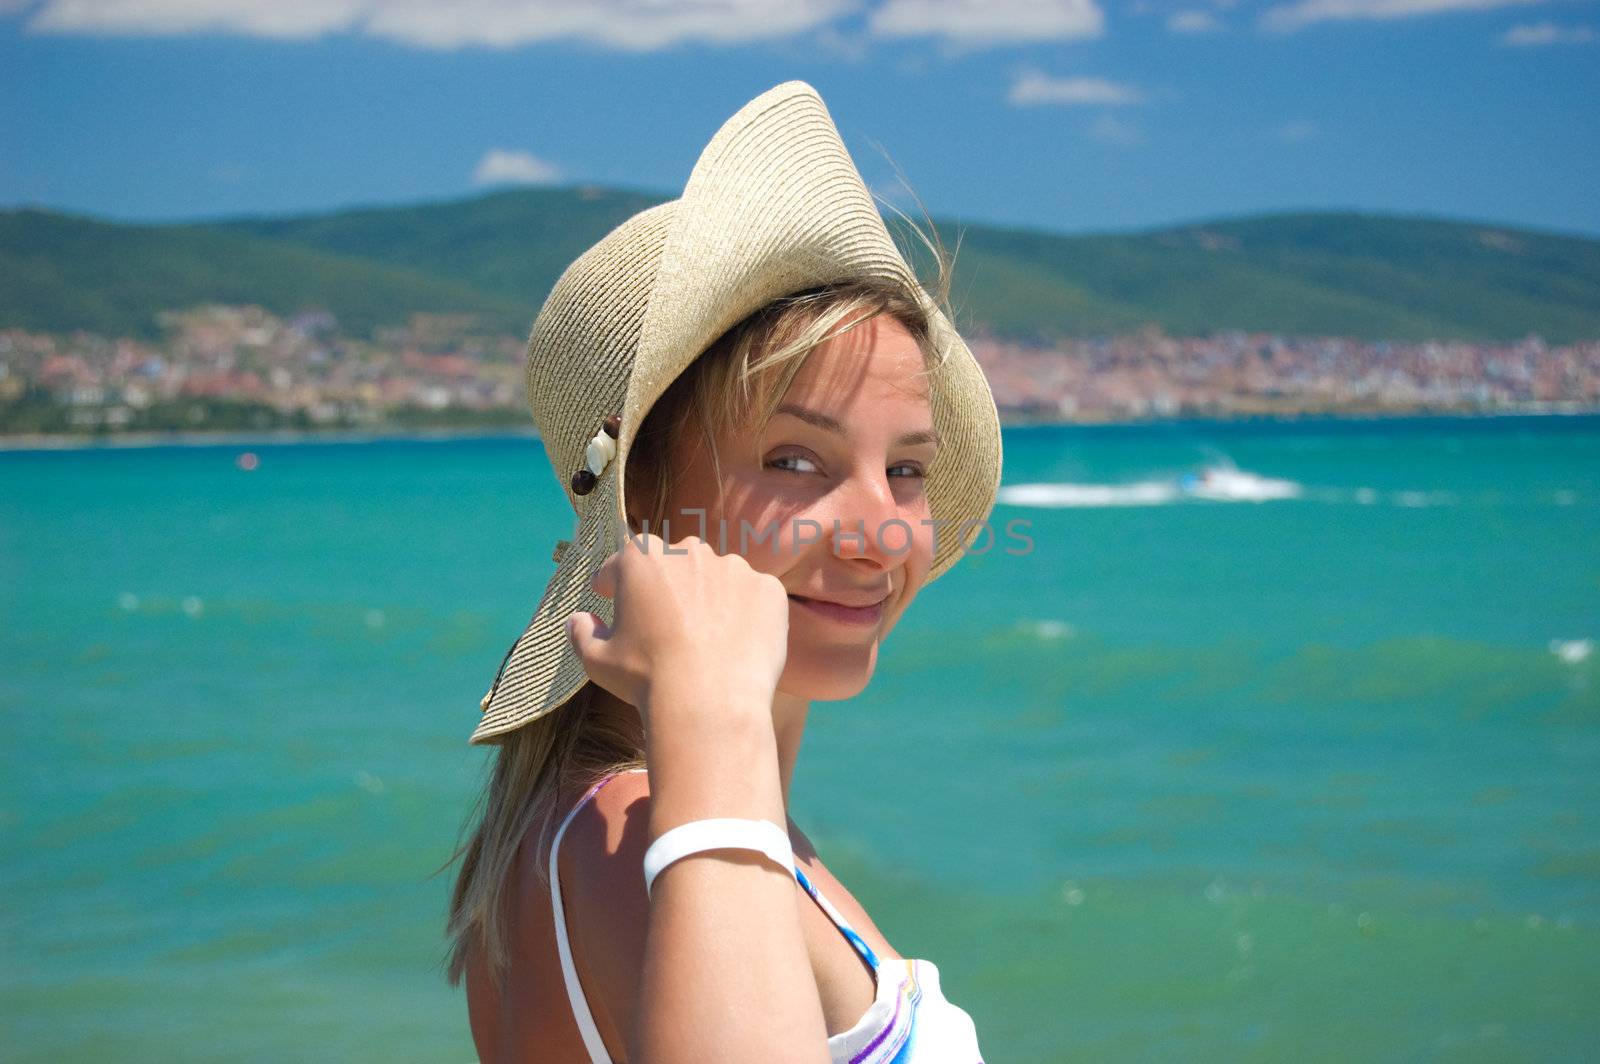 Lovely woman in hat over seashore background